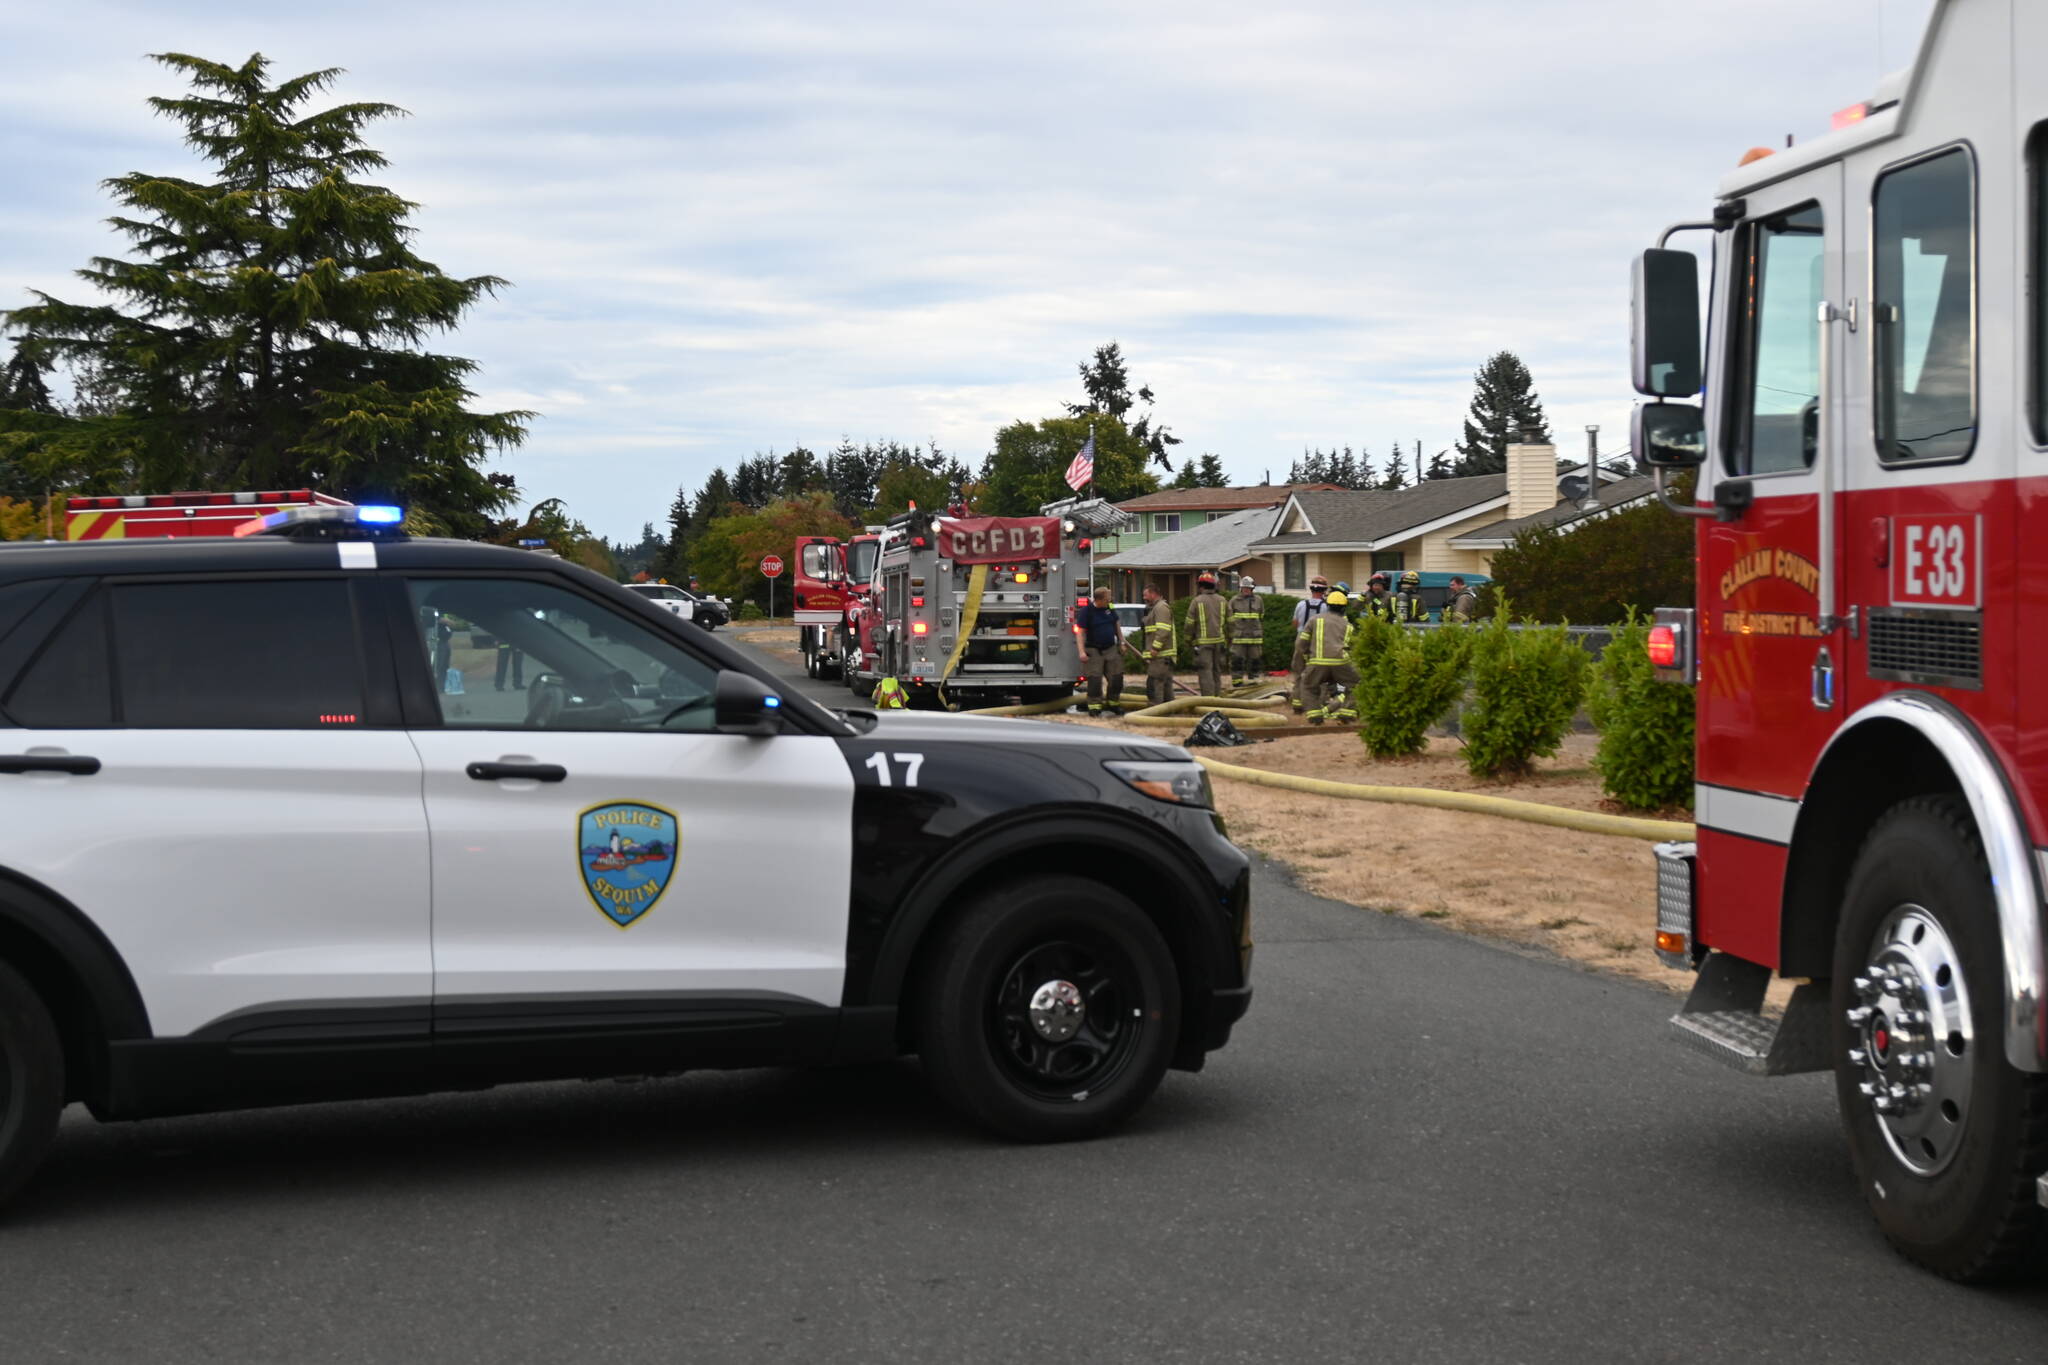 Firefighters from Clallam County Fire District 3 respond to a house fire on the 200 block of North Dunlap Avenue. (Michael Dashiell/Olympic Peninsual News Group)